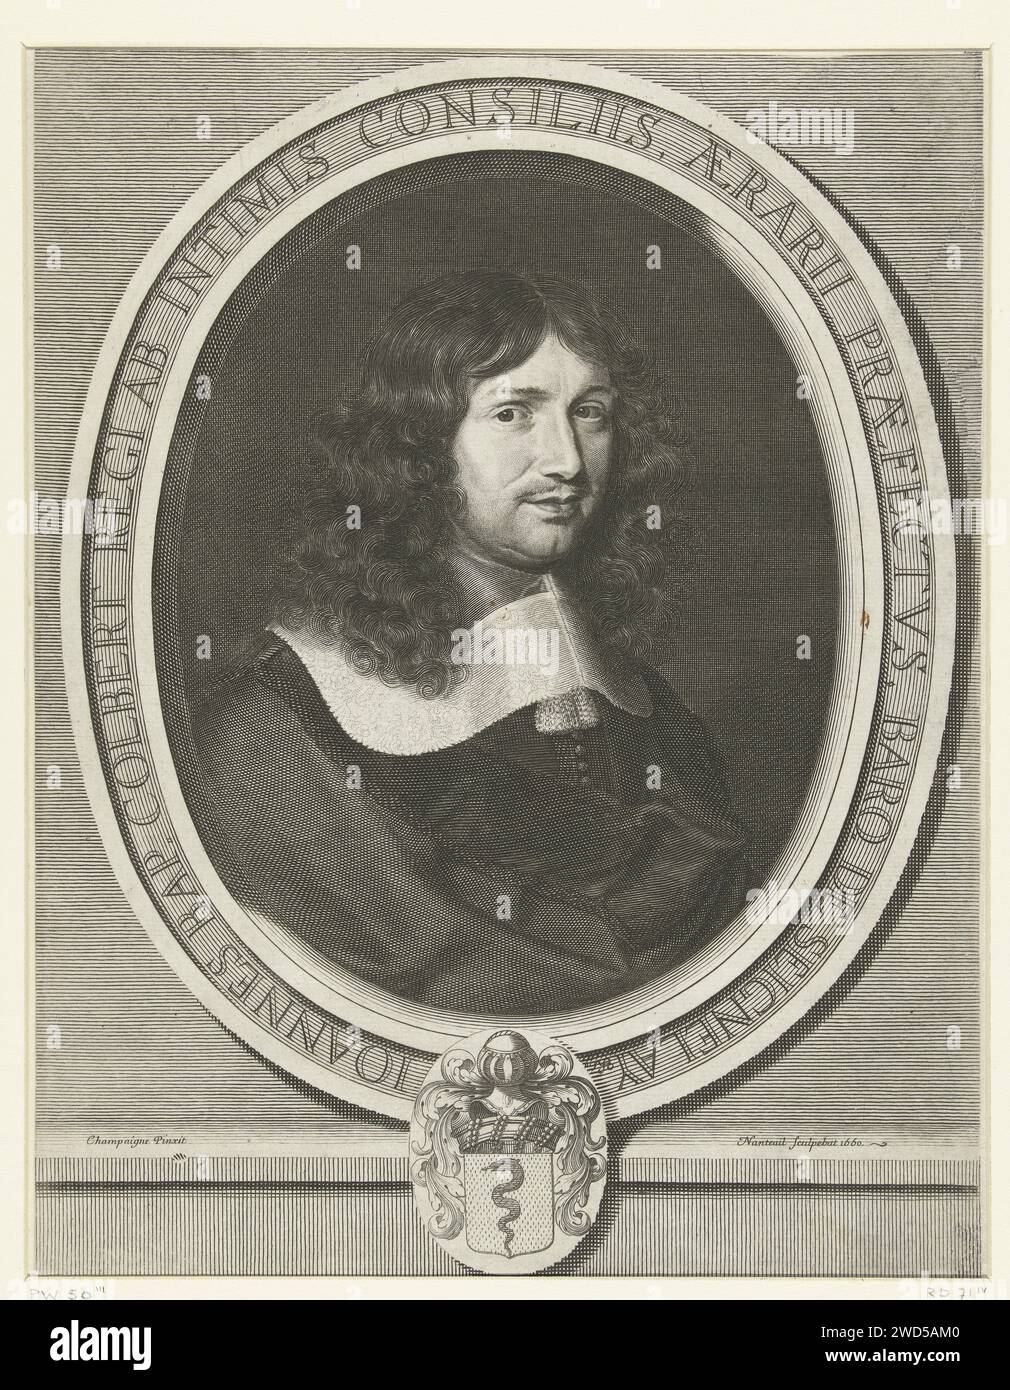 Portret van Jean-Baptiste Colbert, Robert Nanteuil, after Philippe de Champaigne, 1660 print Portrait of Jean-Baptiste Colbert, Marquis van Seignelay, three-quarters to the right, in an oval frame with text. At the bottom of a coat of arms. France paper engraving Stock Photo